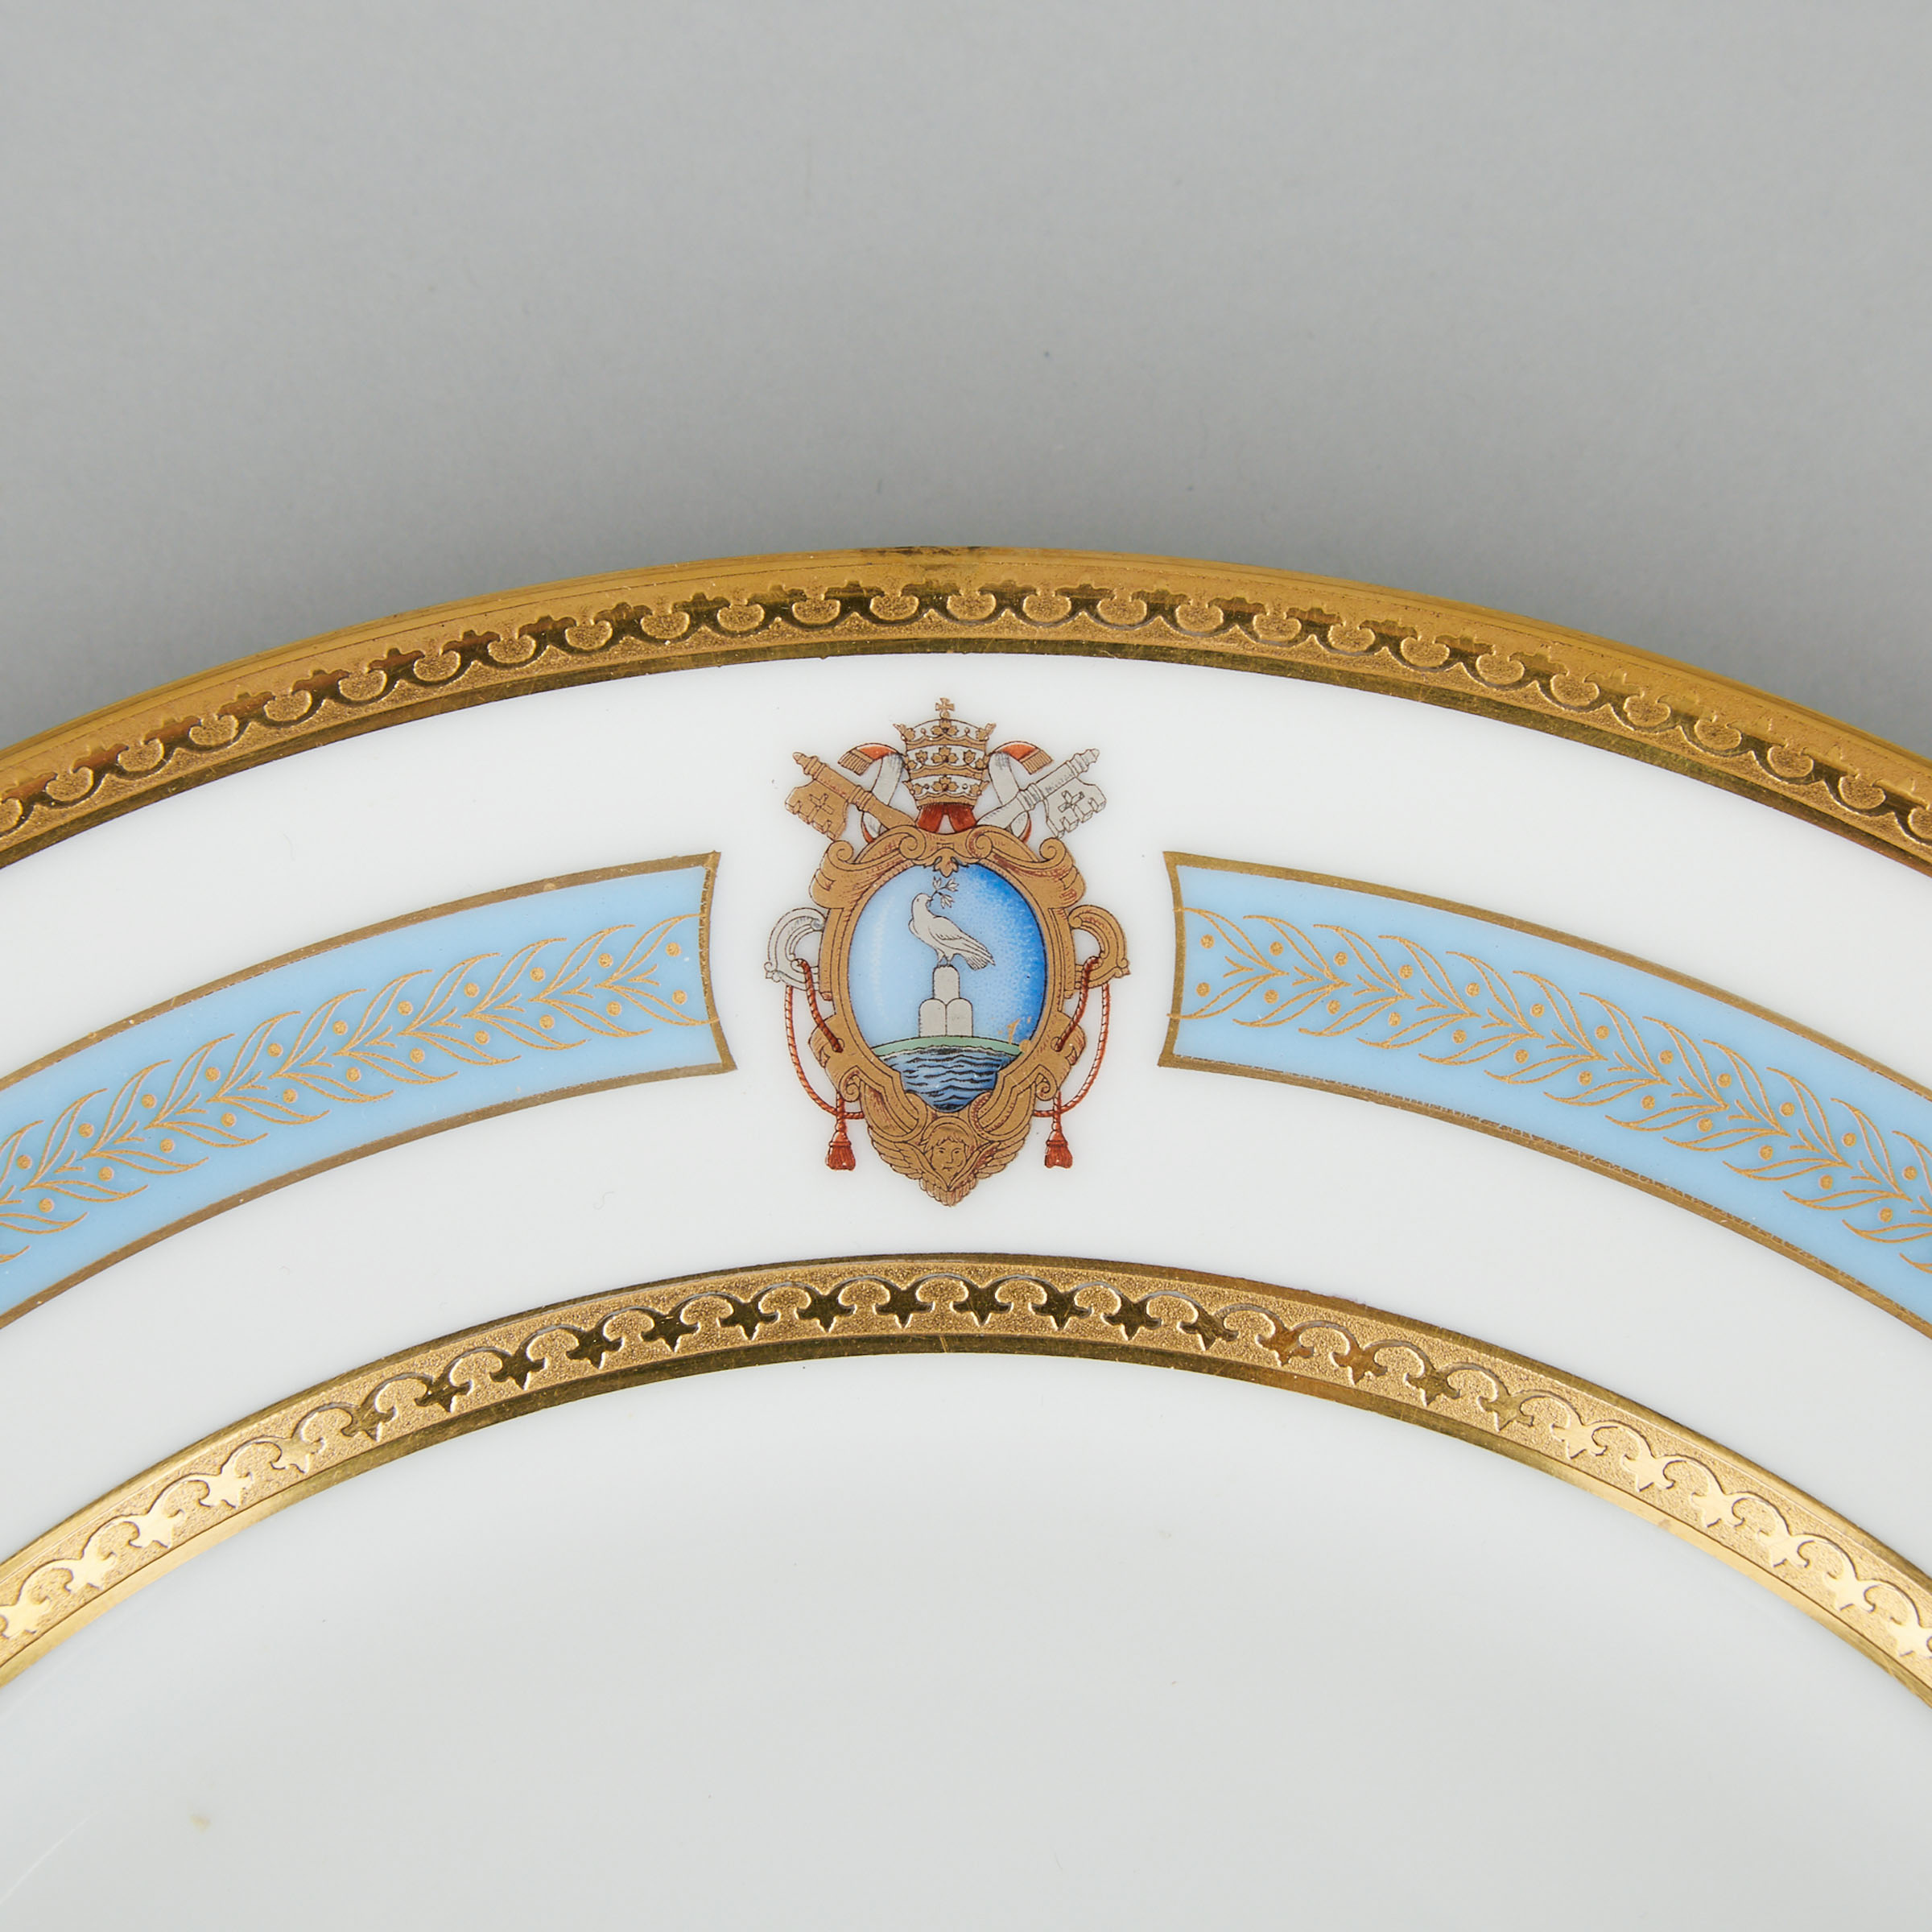 Heinrich Armorial Service Plate for Pope Pius XII, Eugenio Pacelli, mid-20th century